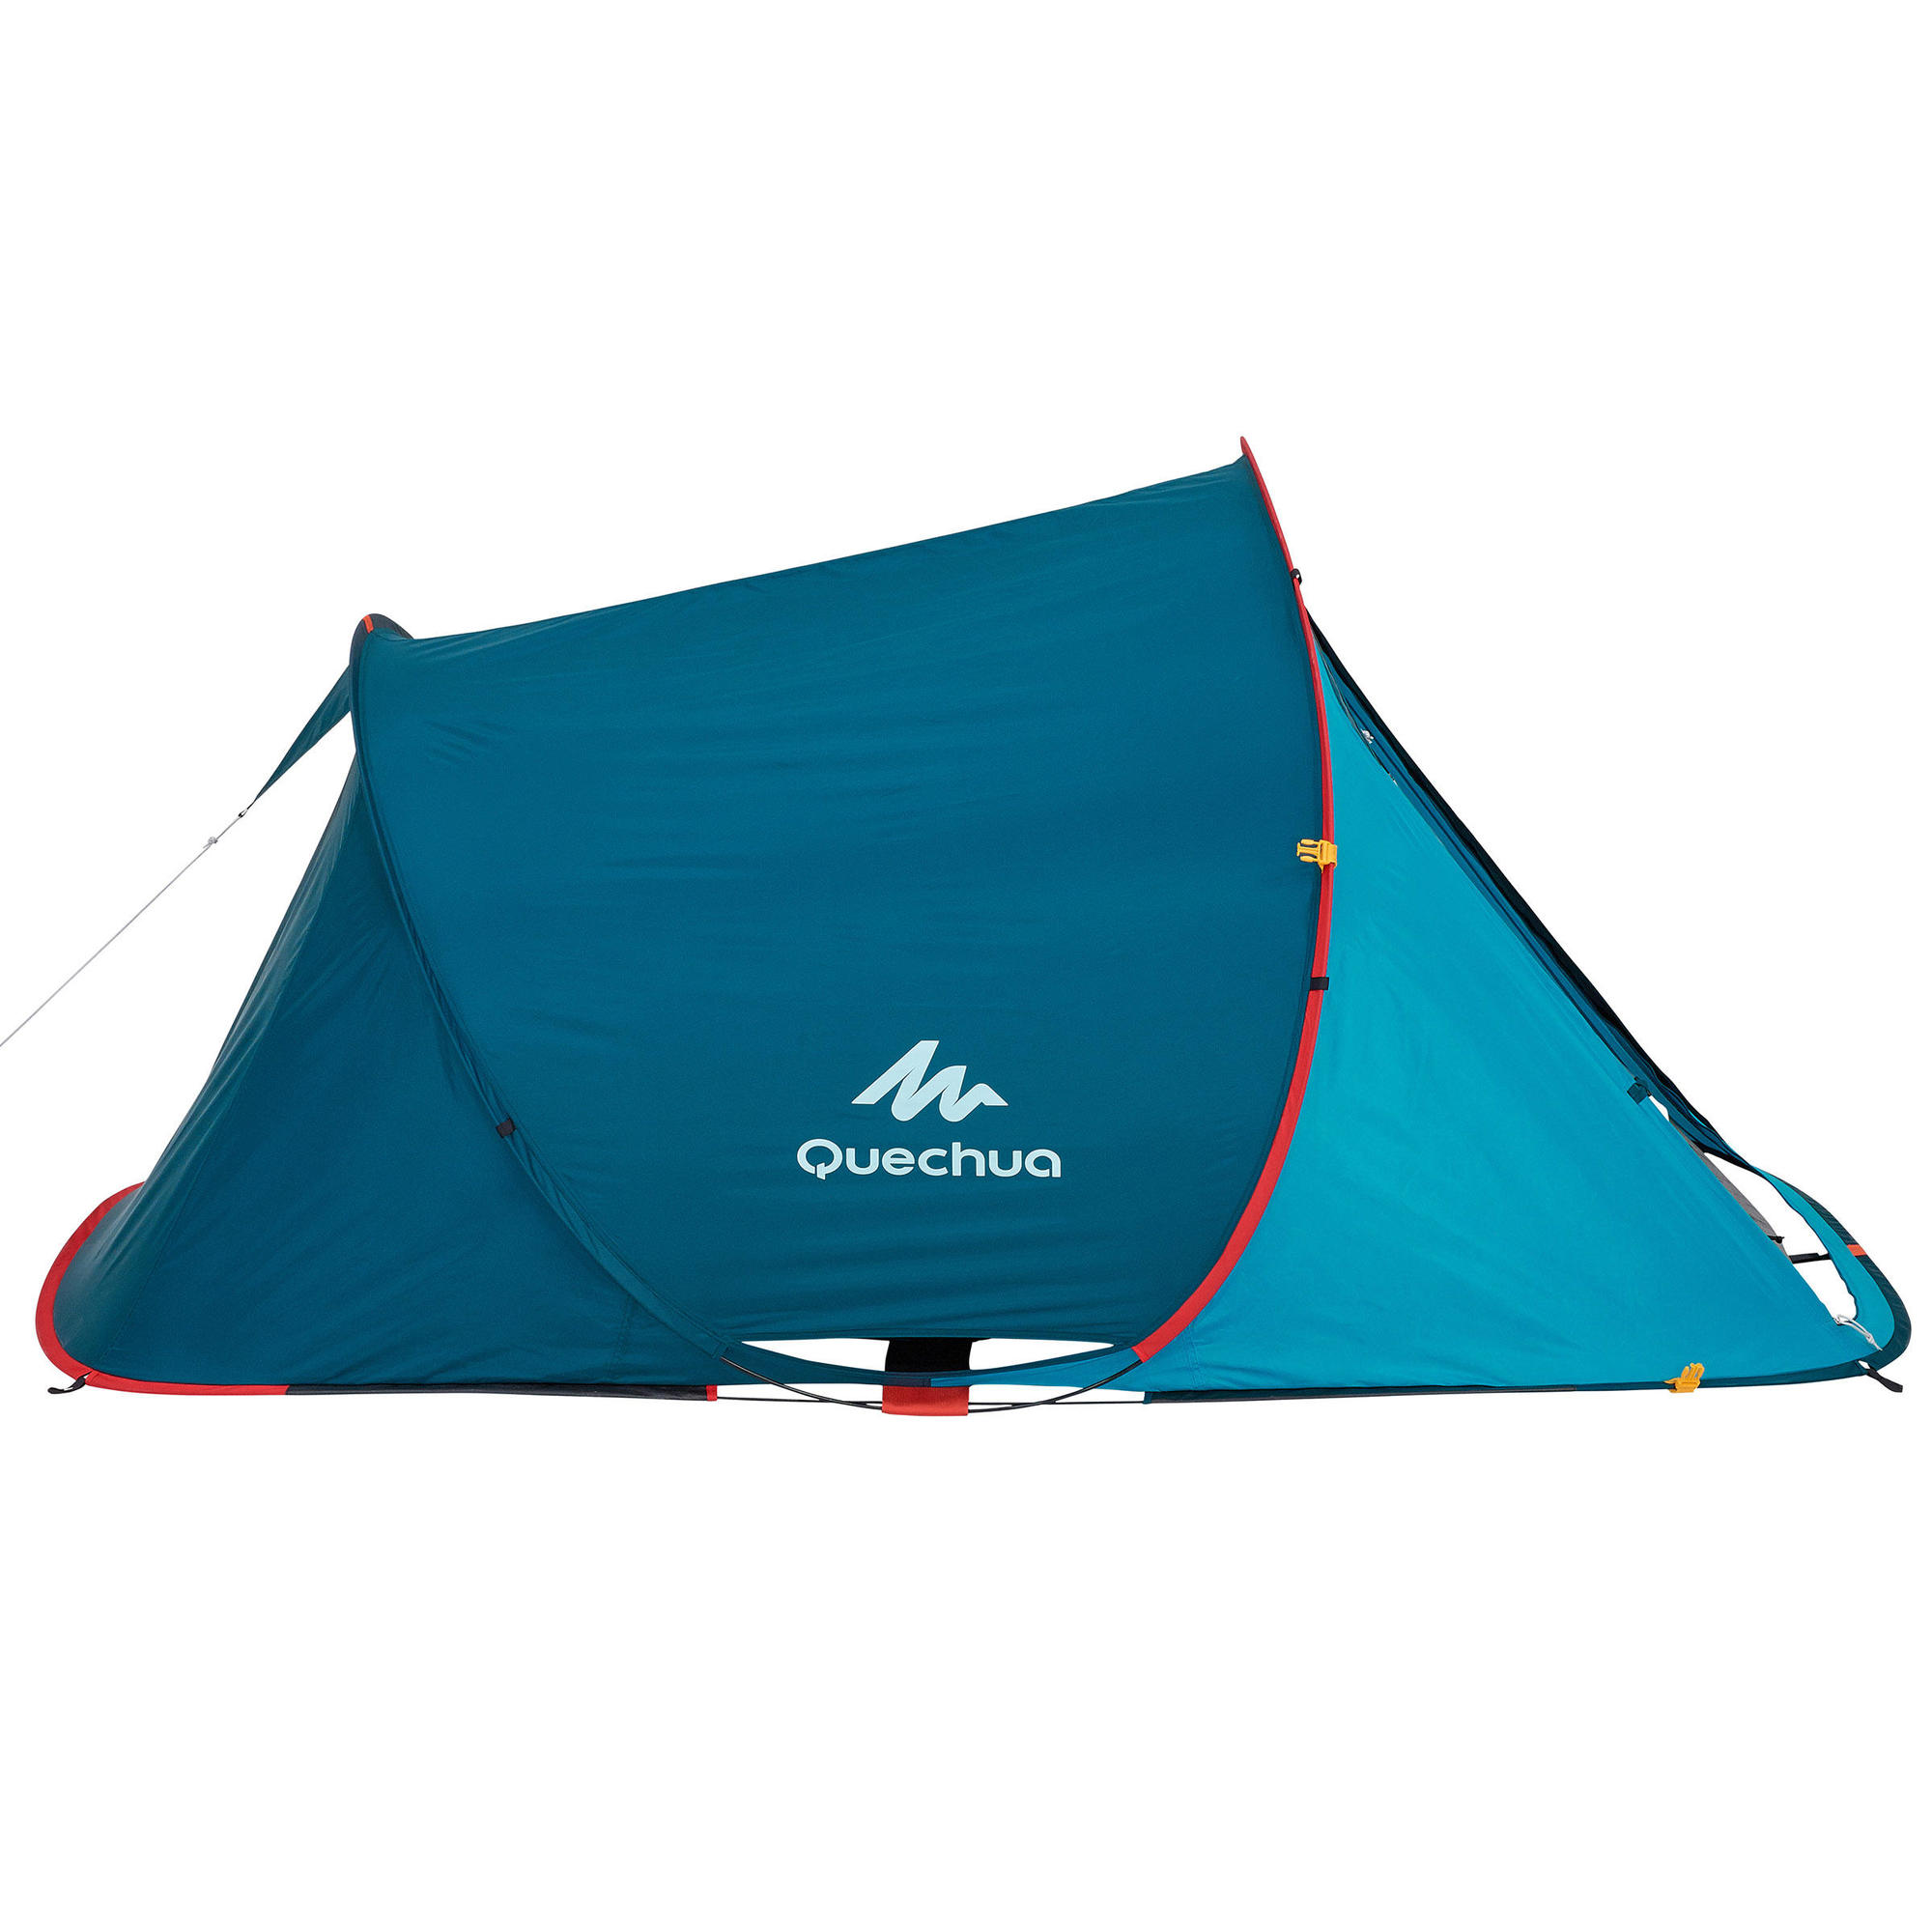 Quechua, Instant 2 Second Pop Up, Portable Outdoor Camping Tent, Waterproof, Windproof, 2 Person - image 5 of 10